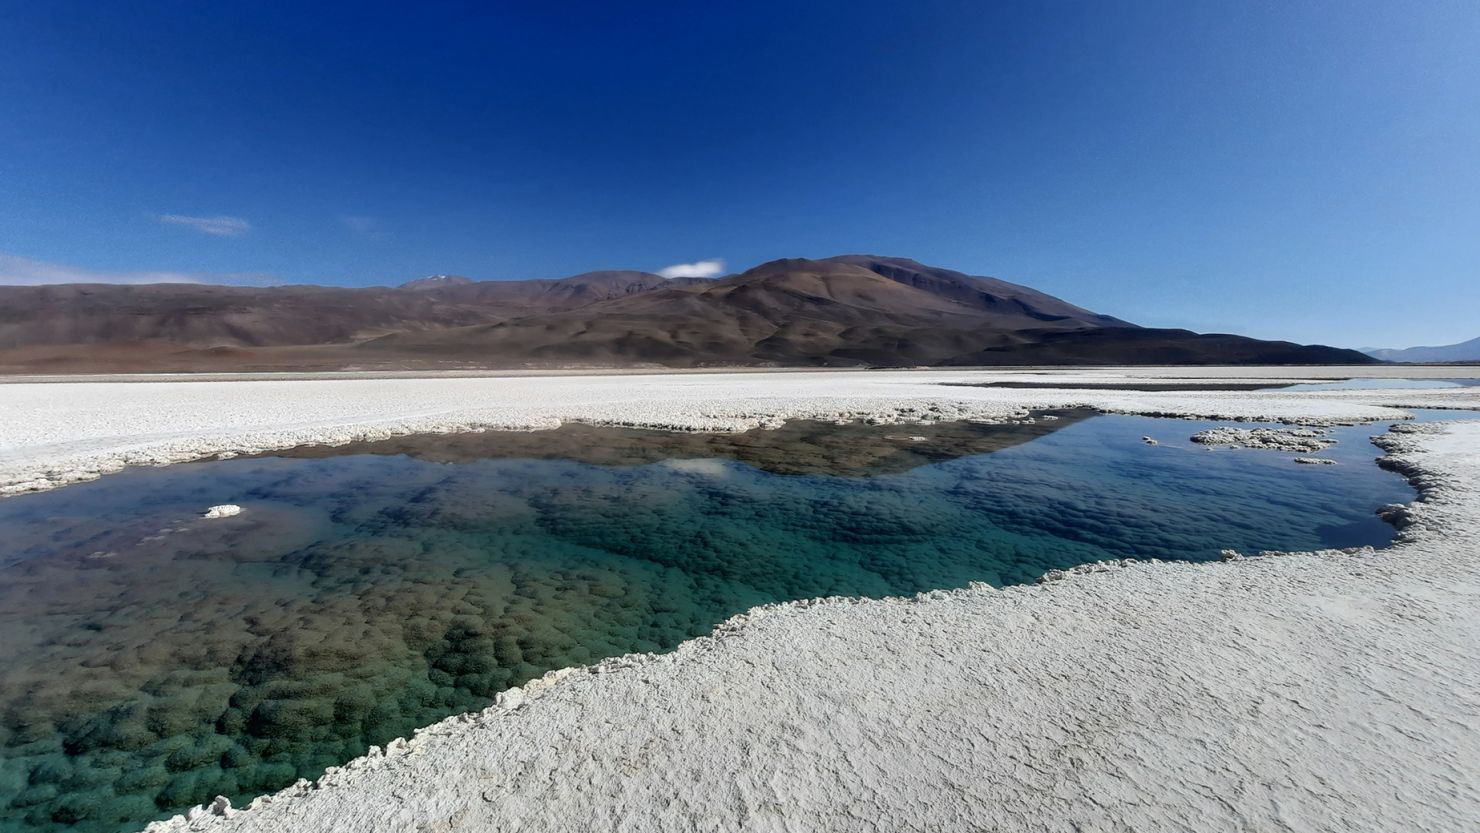 A high plateau in northwestern Argentina has salt lagoons with living giant stromatolites, layered rocks created by microbes that represent the earliest fossil evidence for life on Earth.